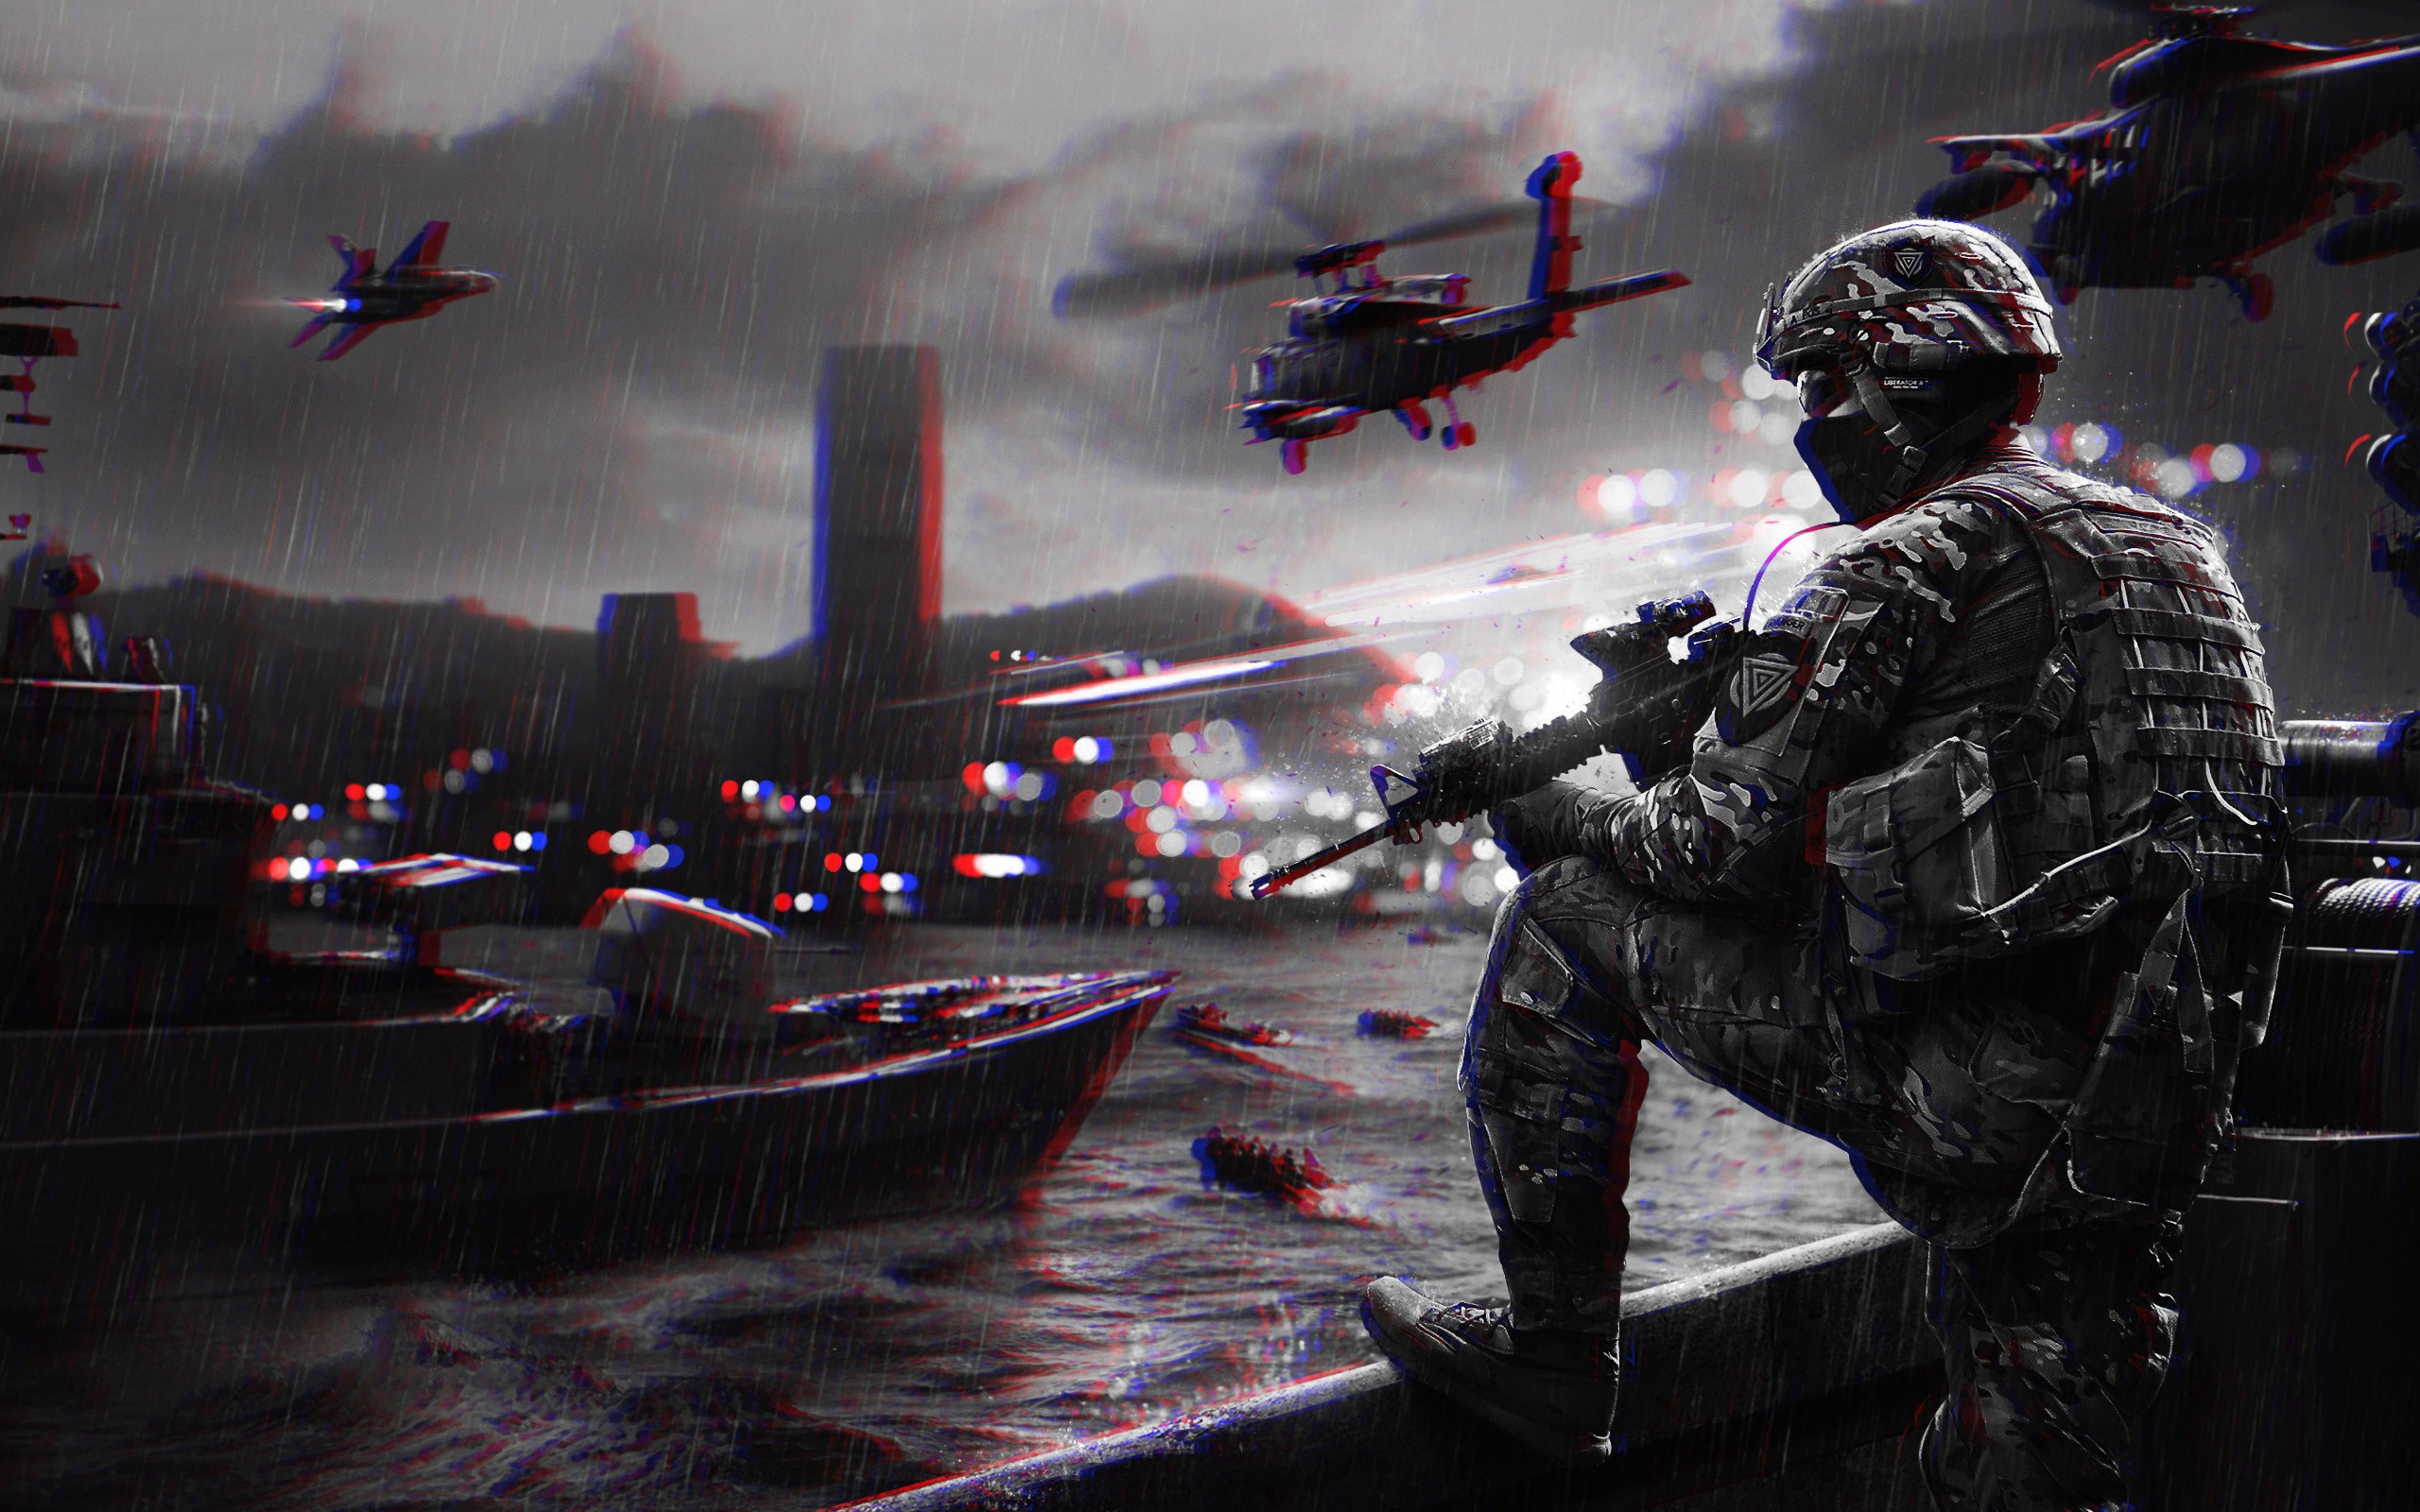 General 2560x1600 Battlefield (game) CGI anaglyph 3D Battlefield 4 video games PC gaming fan art helicopters video game art military soldier weapon